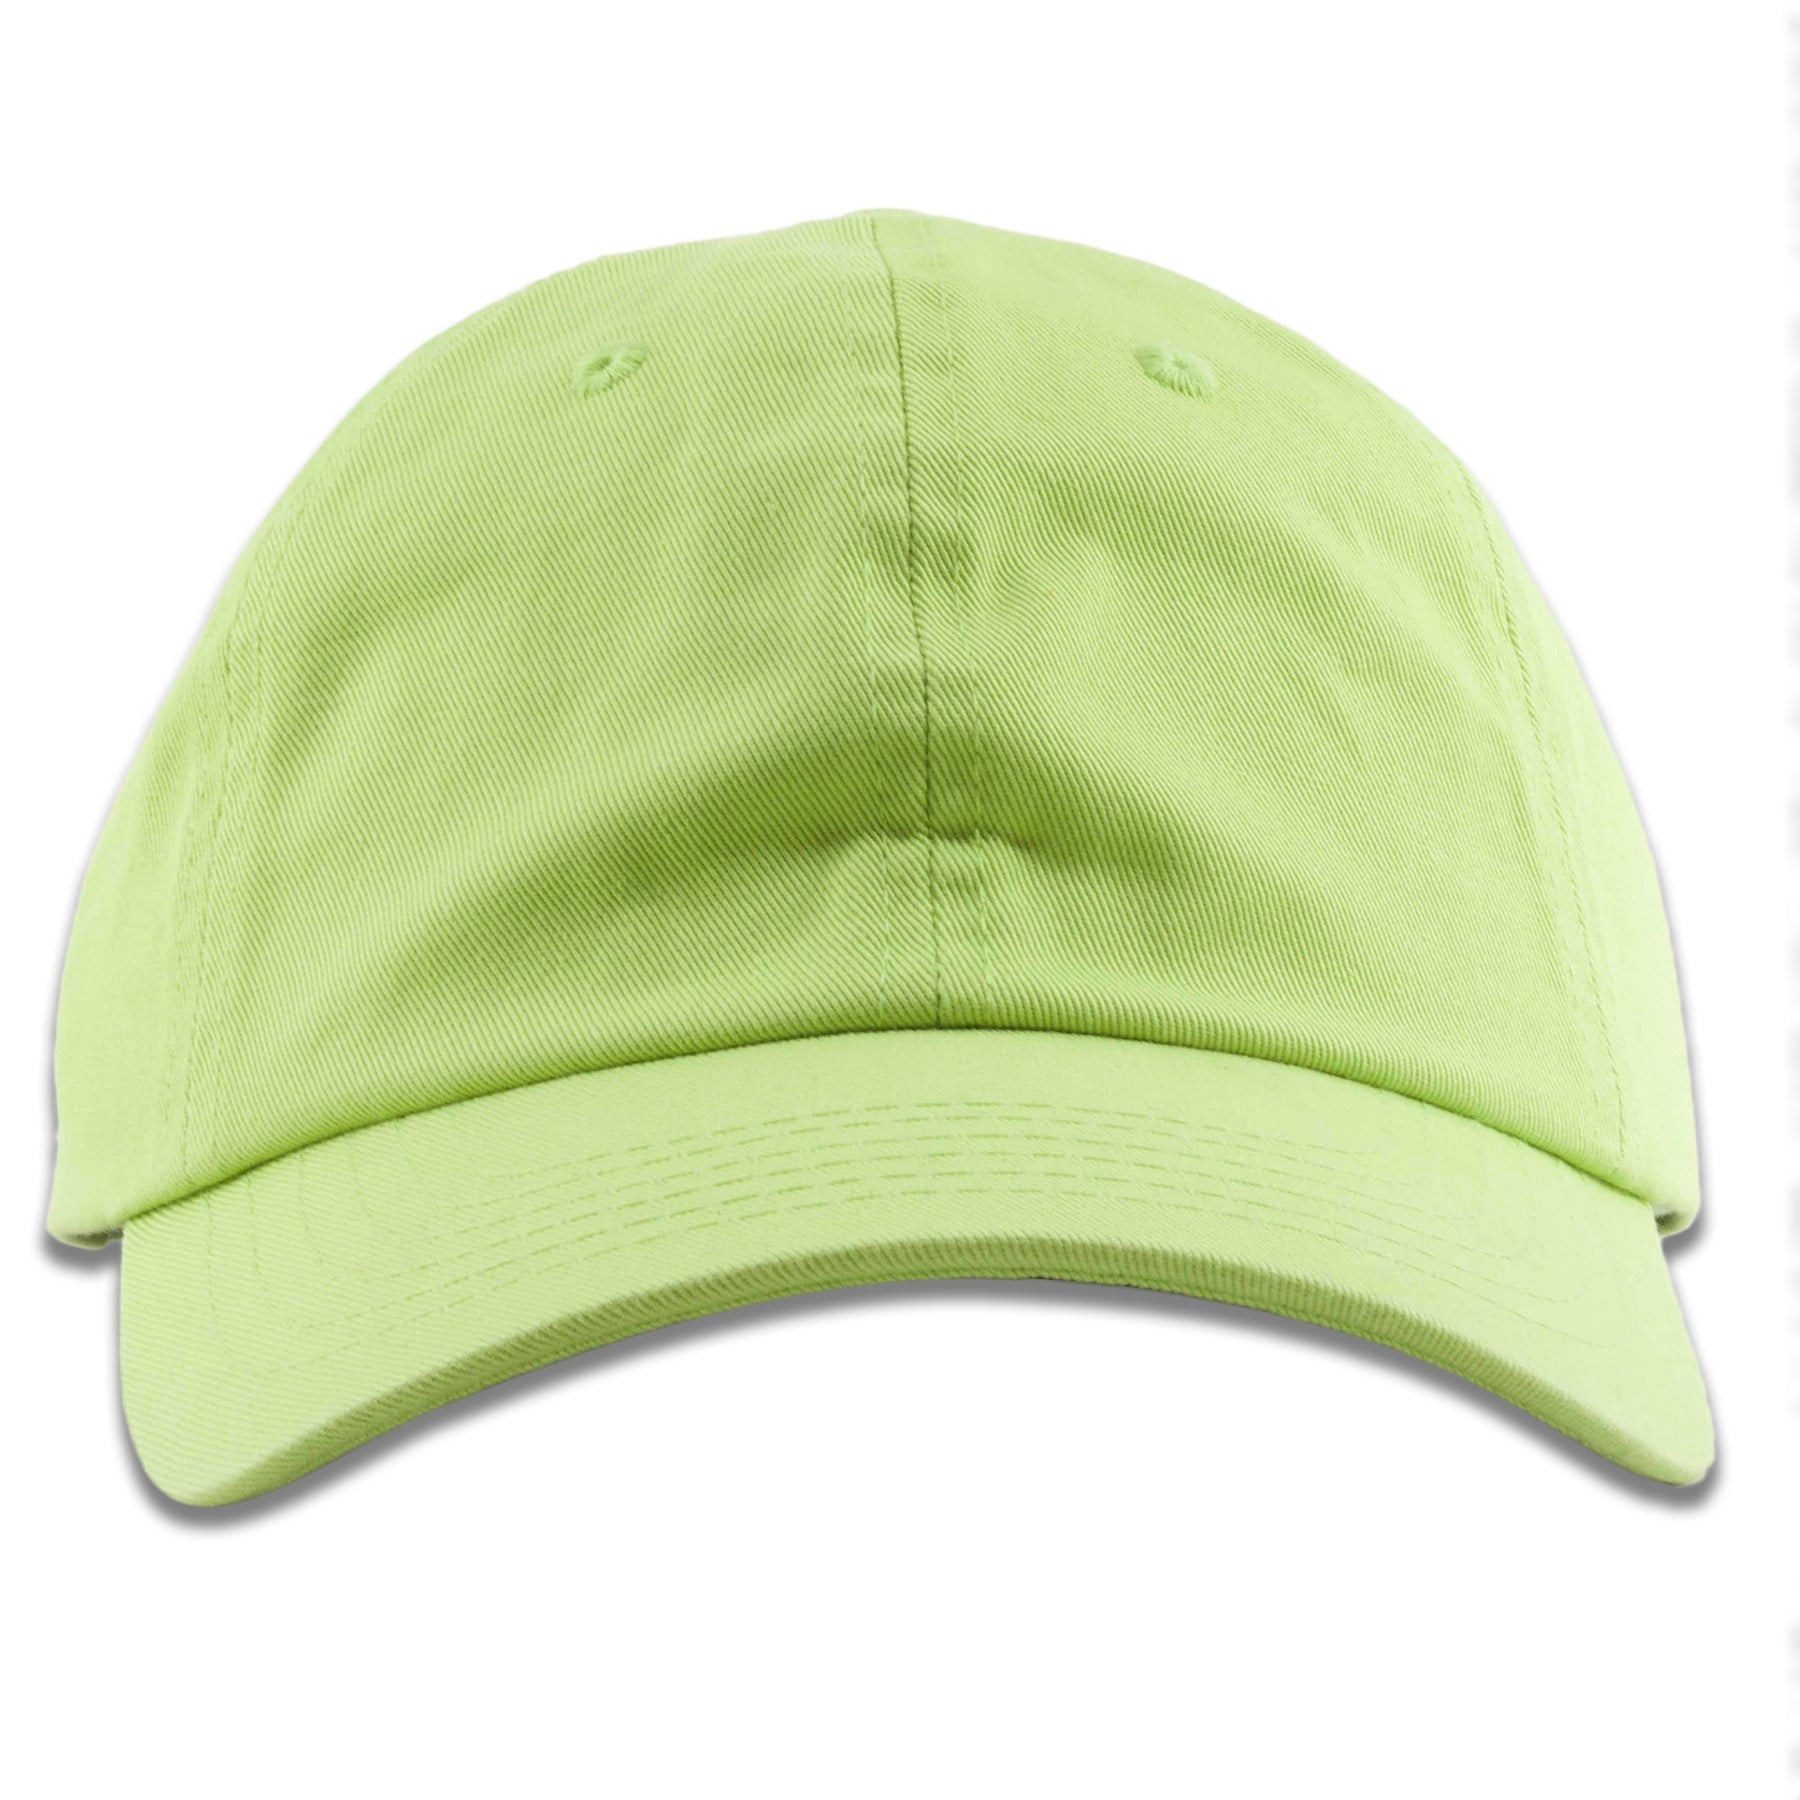 The lime green blank baseball cap is lime green with an unstructured crown and a bent brim